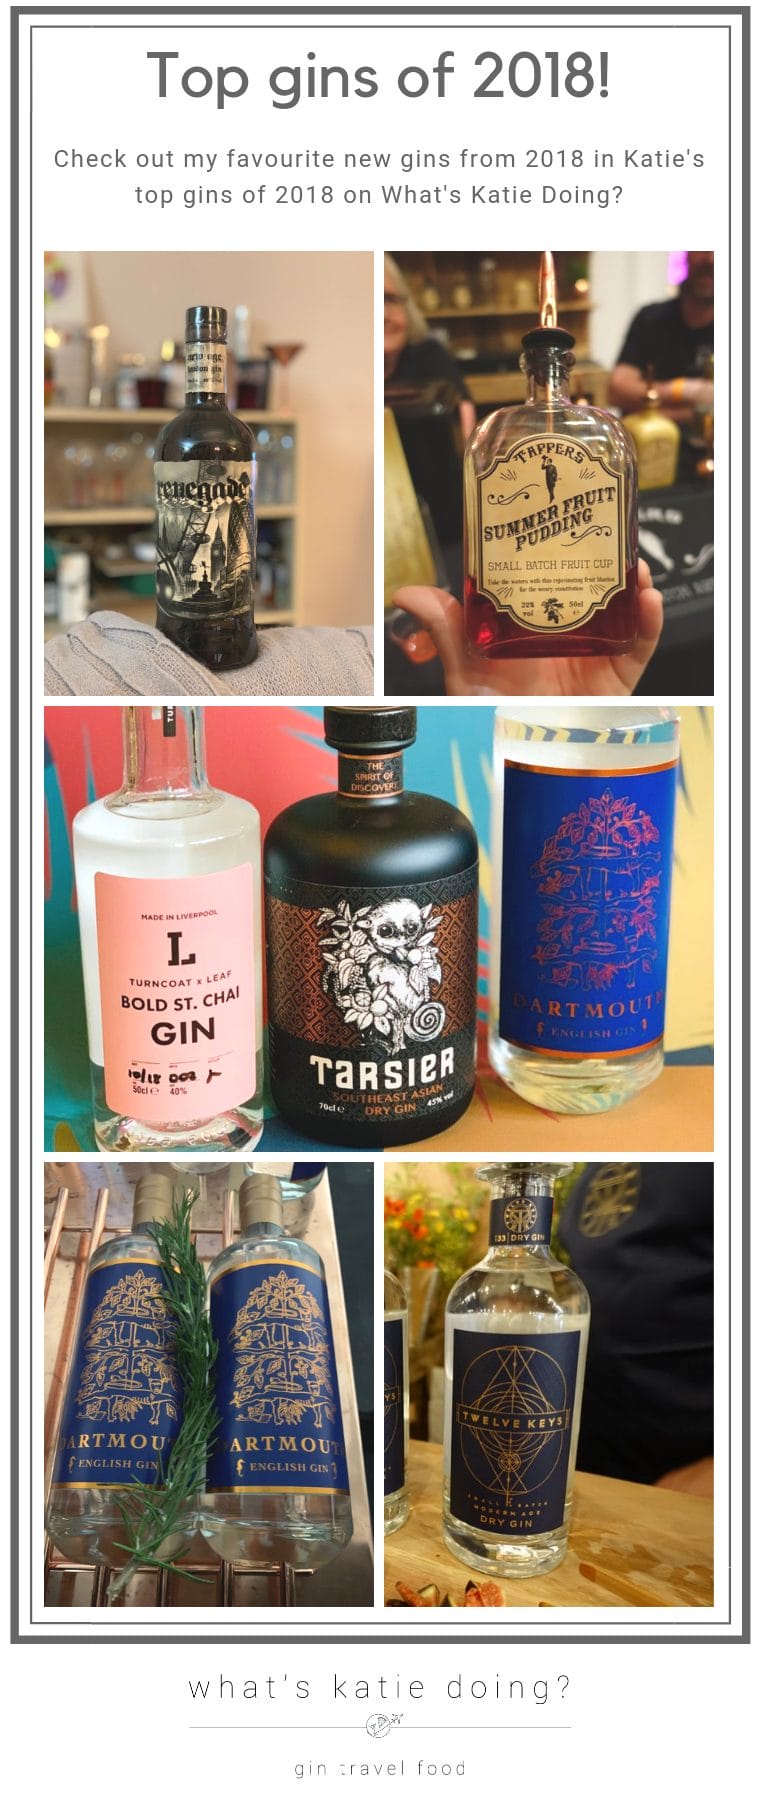 Katie's top new gins of 2018 - the ones to check out and keep an eye on